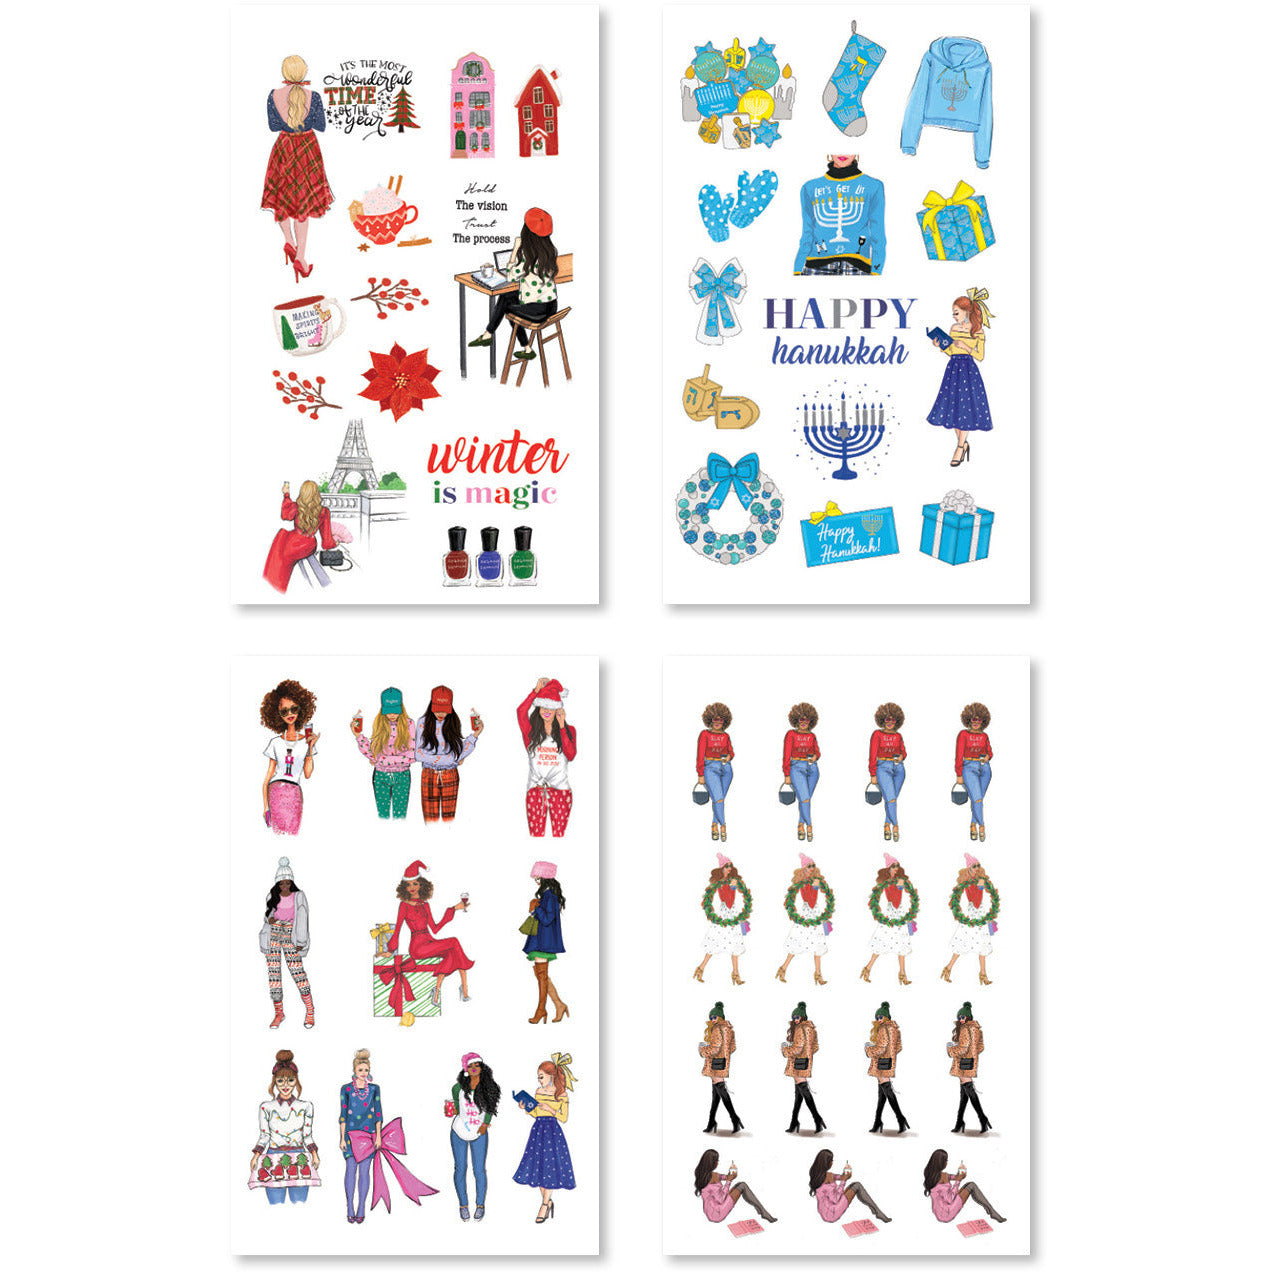 Rongrong Holiday Digital Planner Stickers